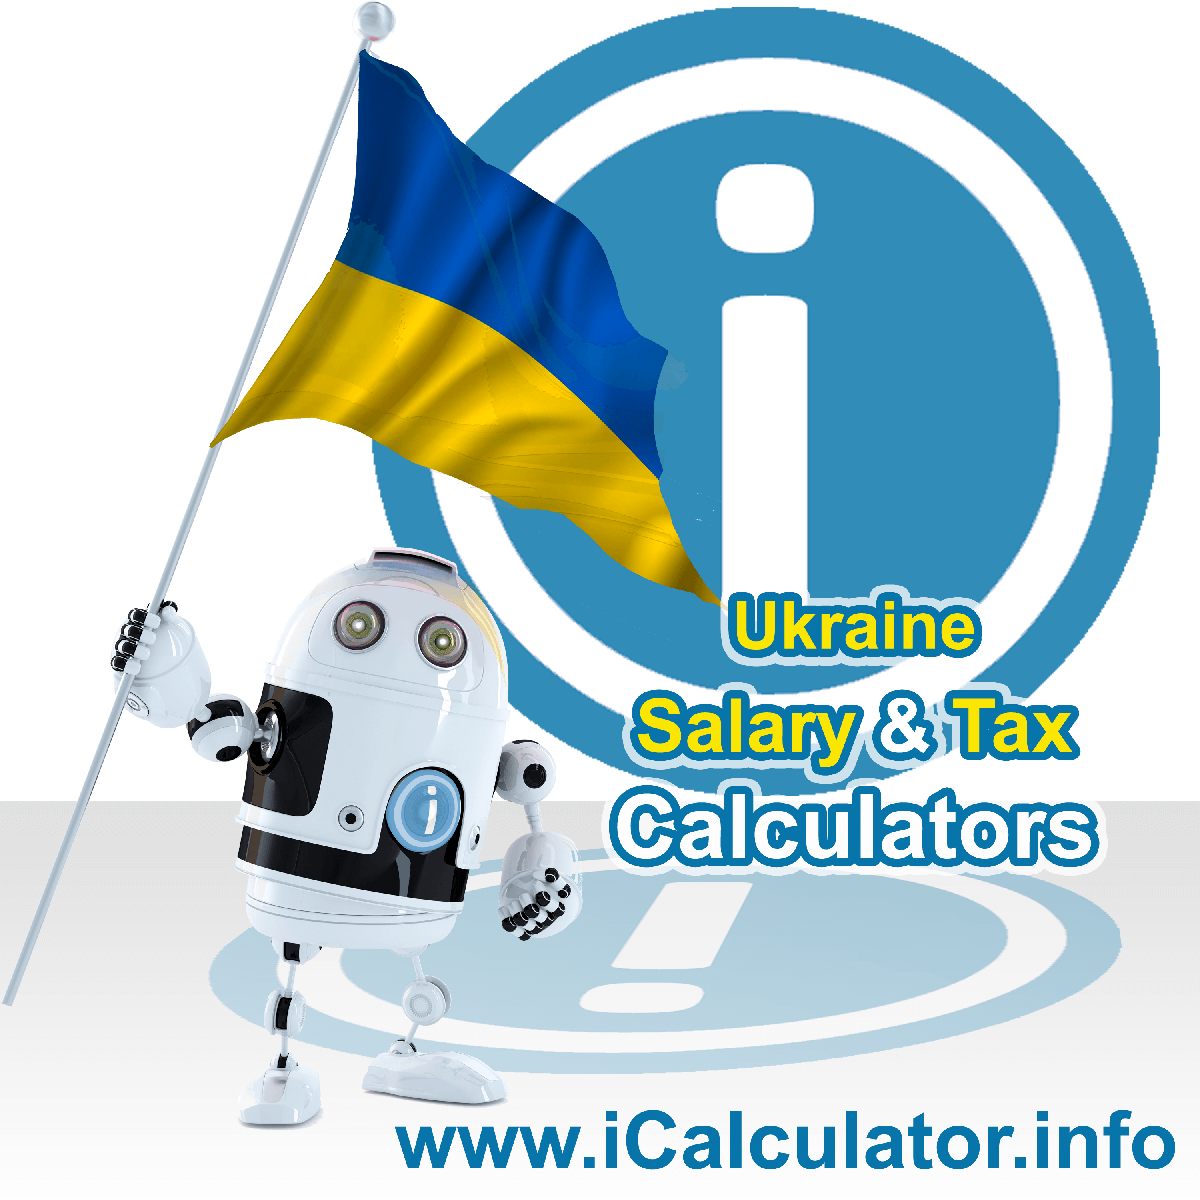 Ukraine Wage Calculator. This image shows the Ukraine flag and information relating to the tax formula for the Ukraine Tax Calculator